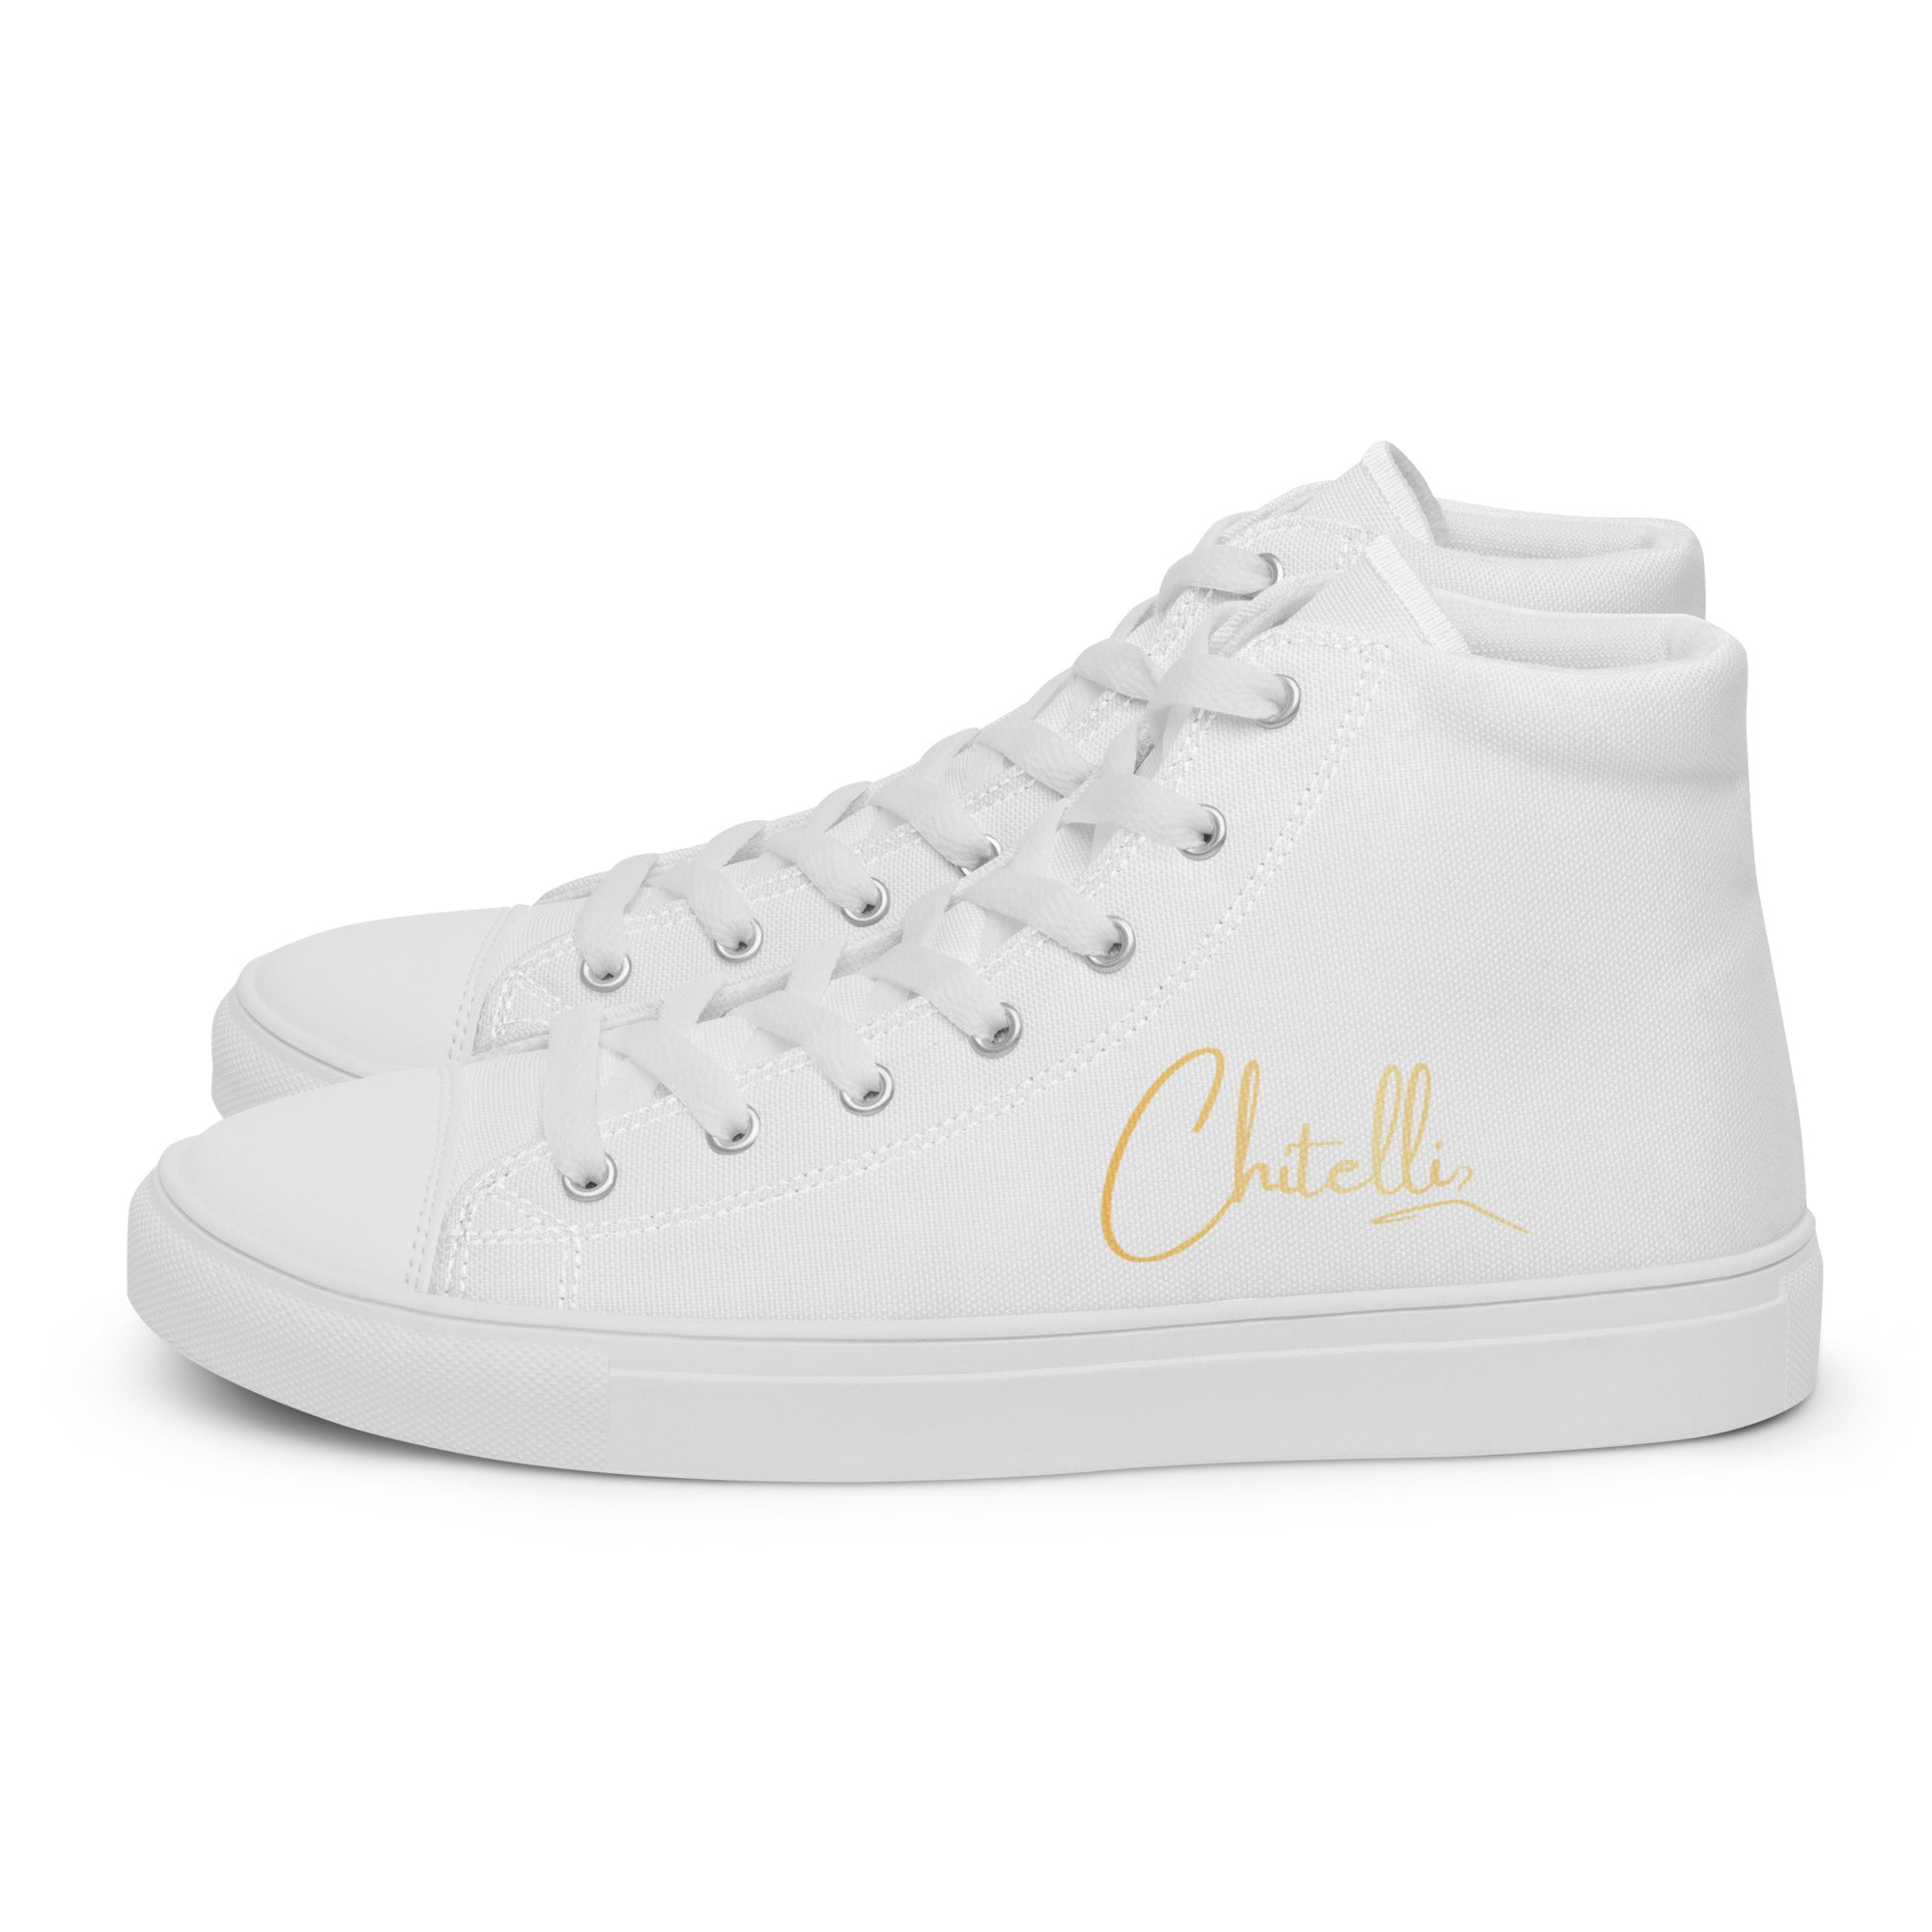 Chitelli's Clean White Women's High Top Sneakers